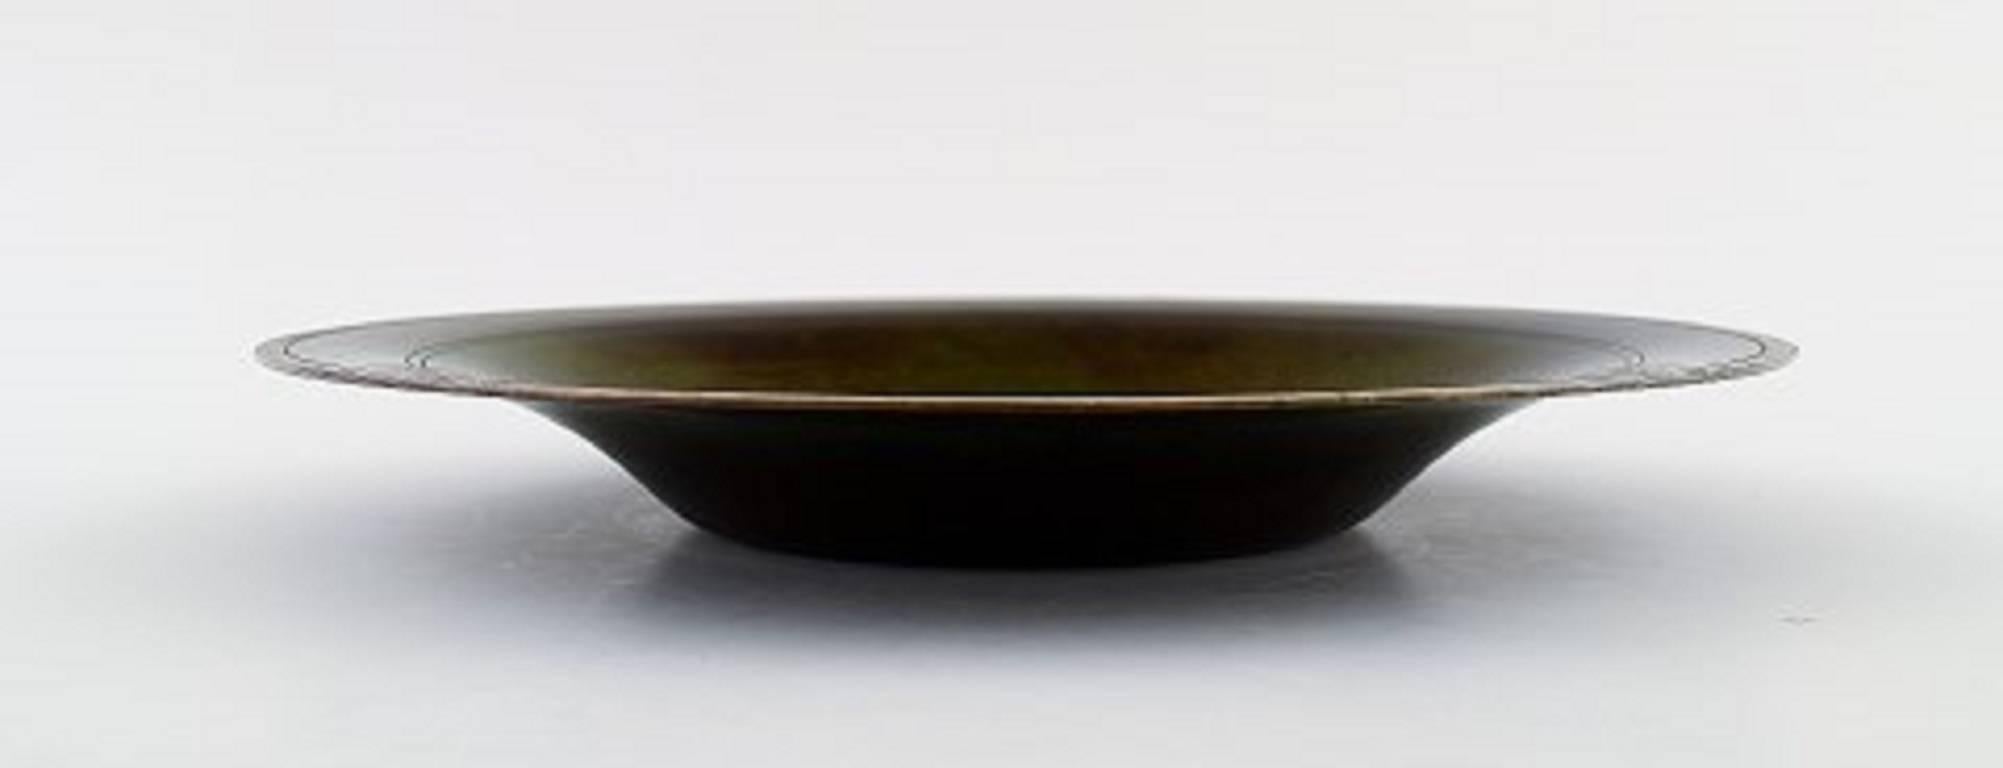 Just Andersen Art Deco bronze bowl or dish,

circa 1930s-1940s.

Signed LB 1614.

In good condition, beautiful patina.

Measures: 21 cm. x 3 cm.